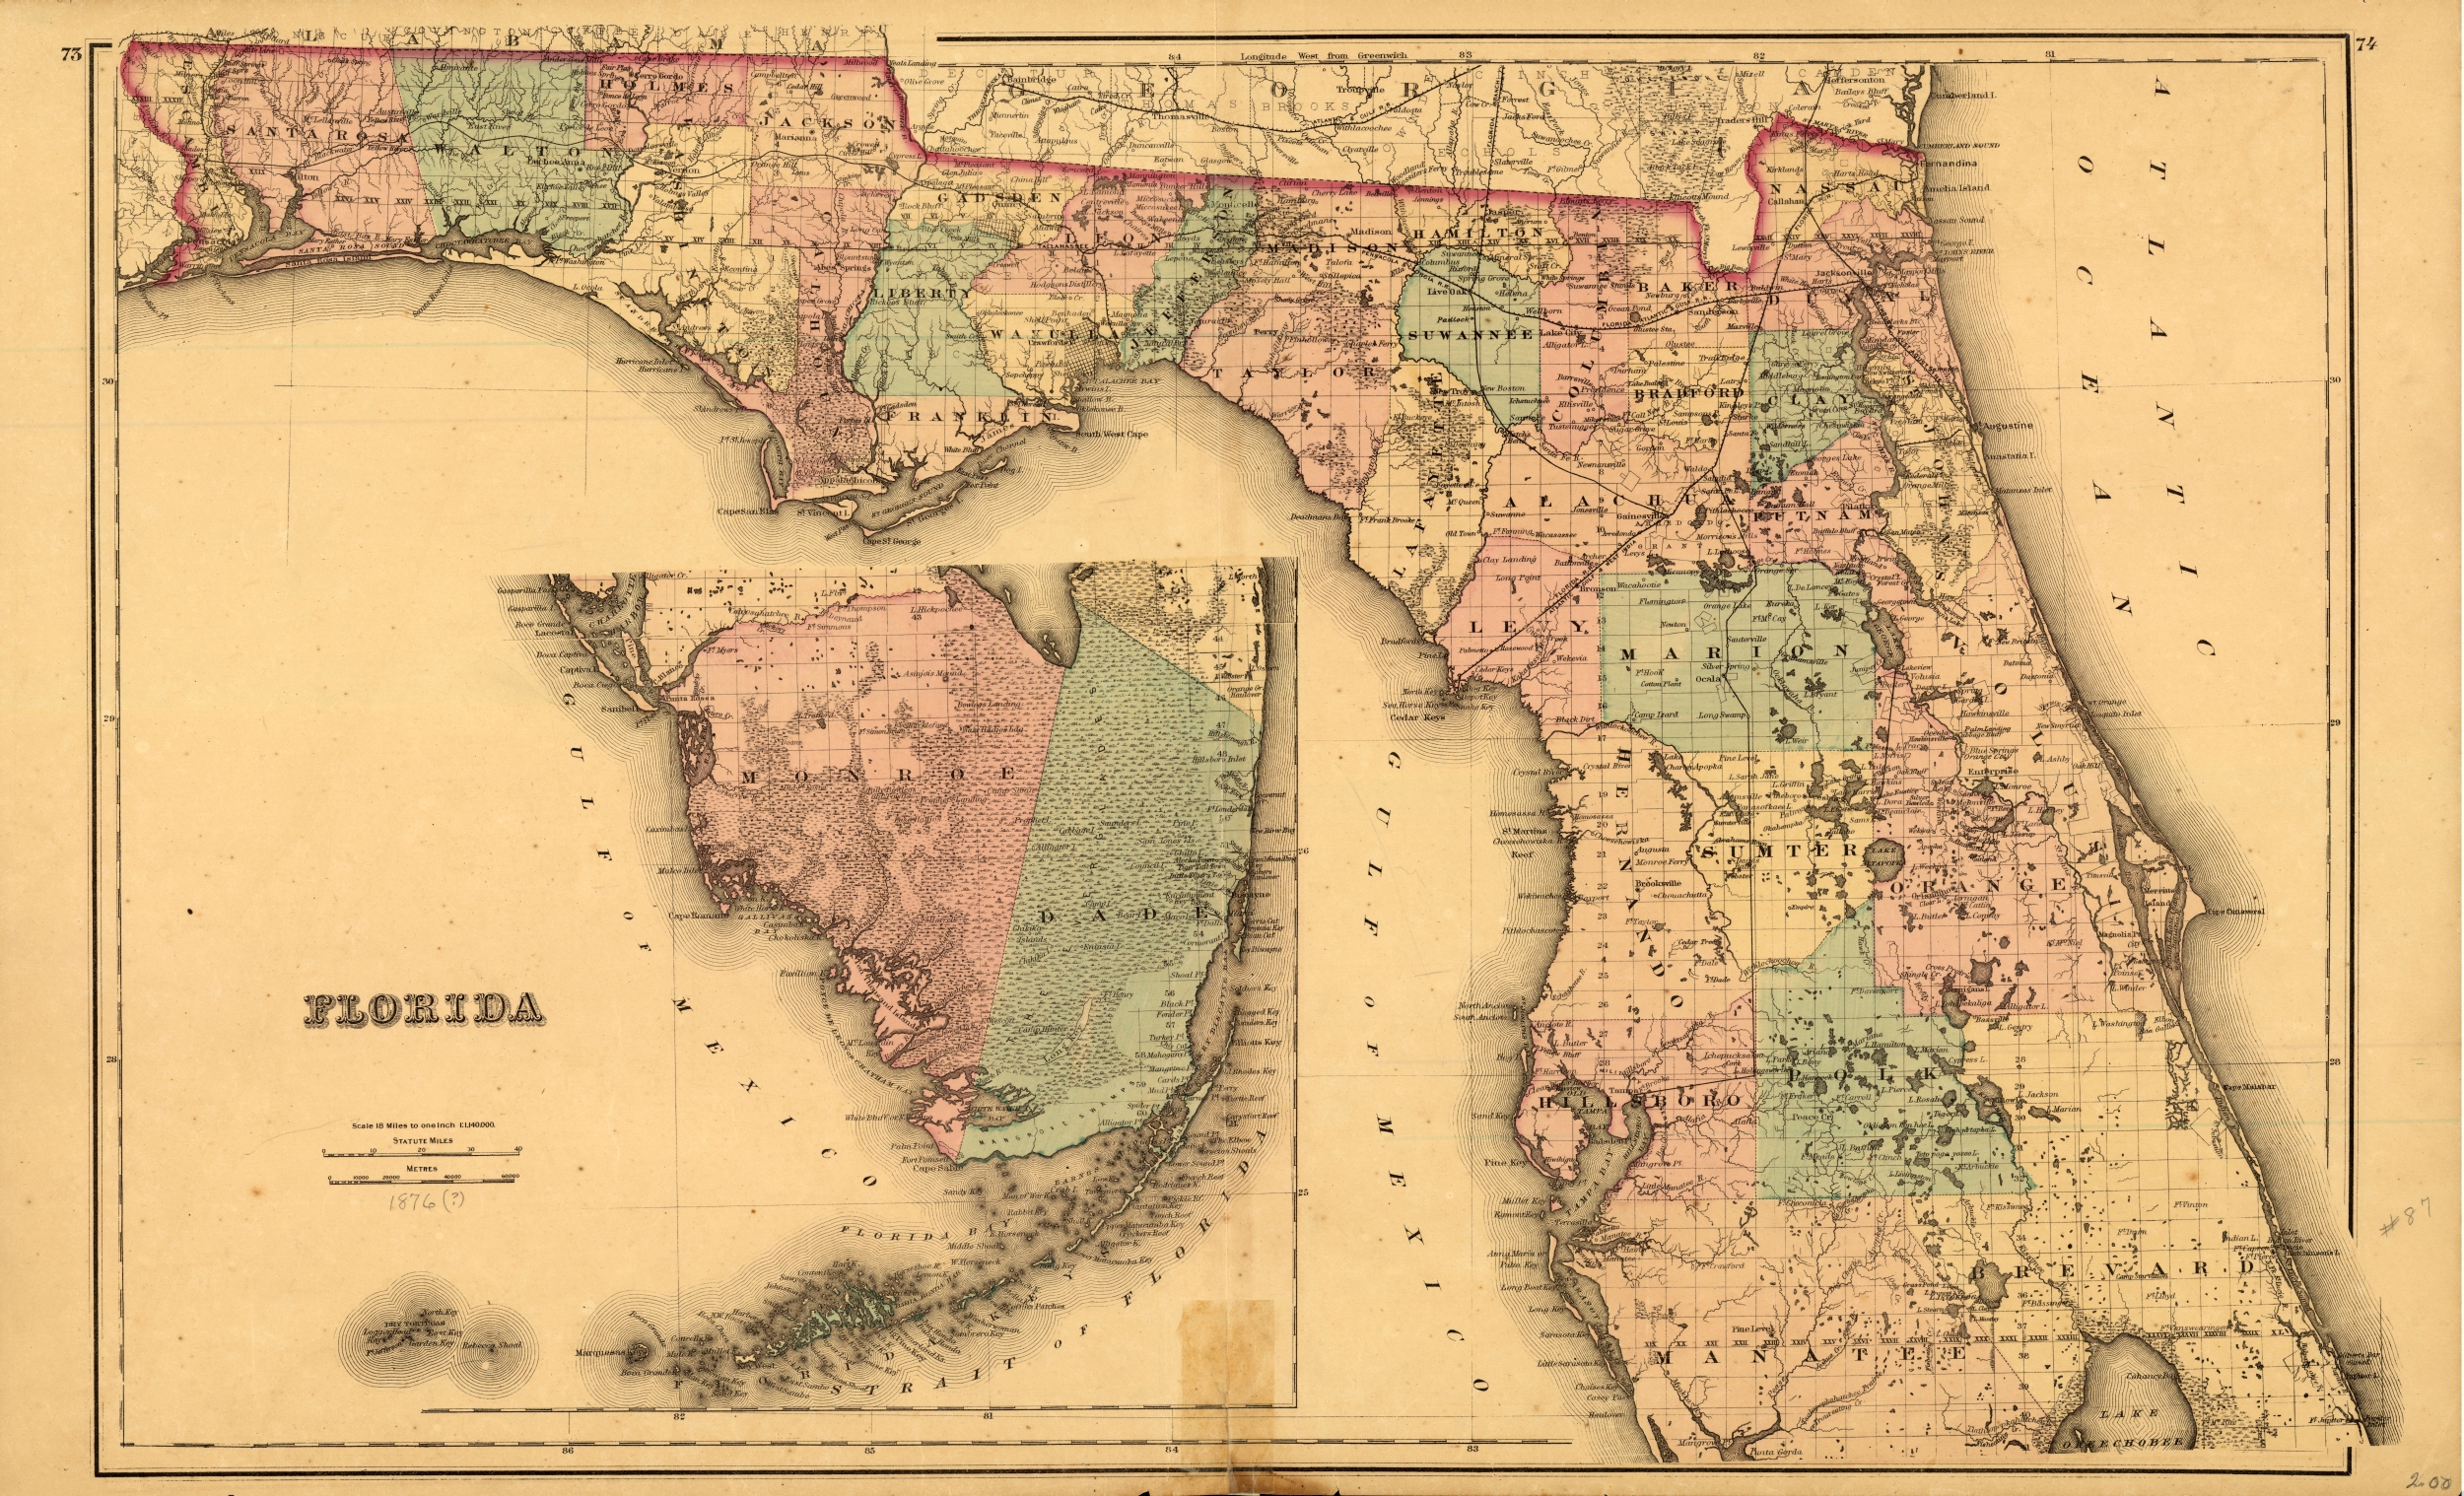 State of Florida, 1876